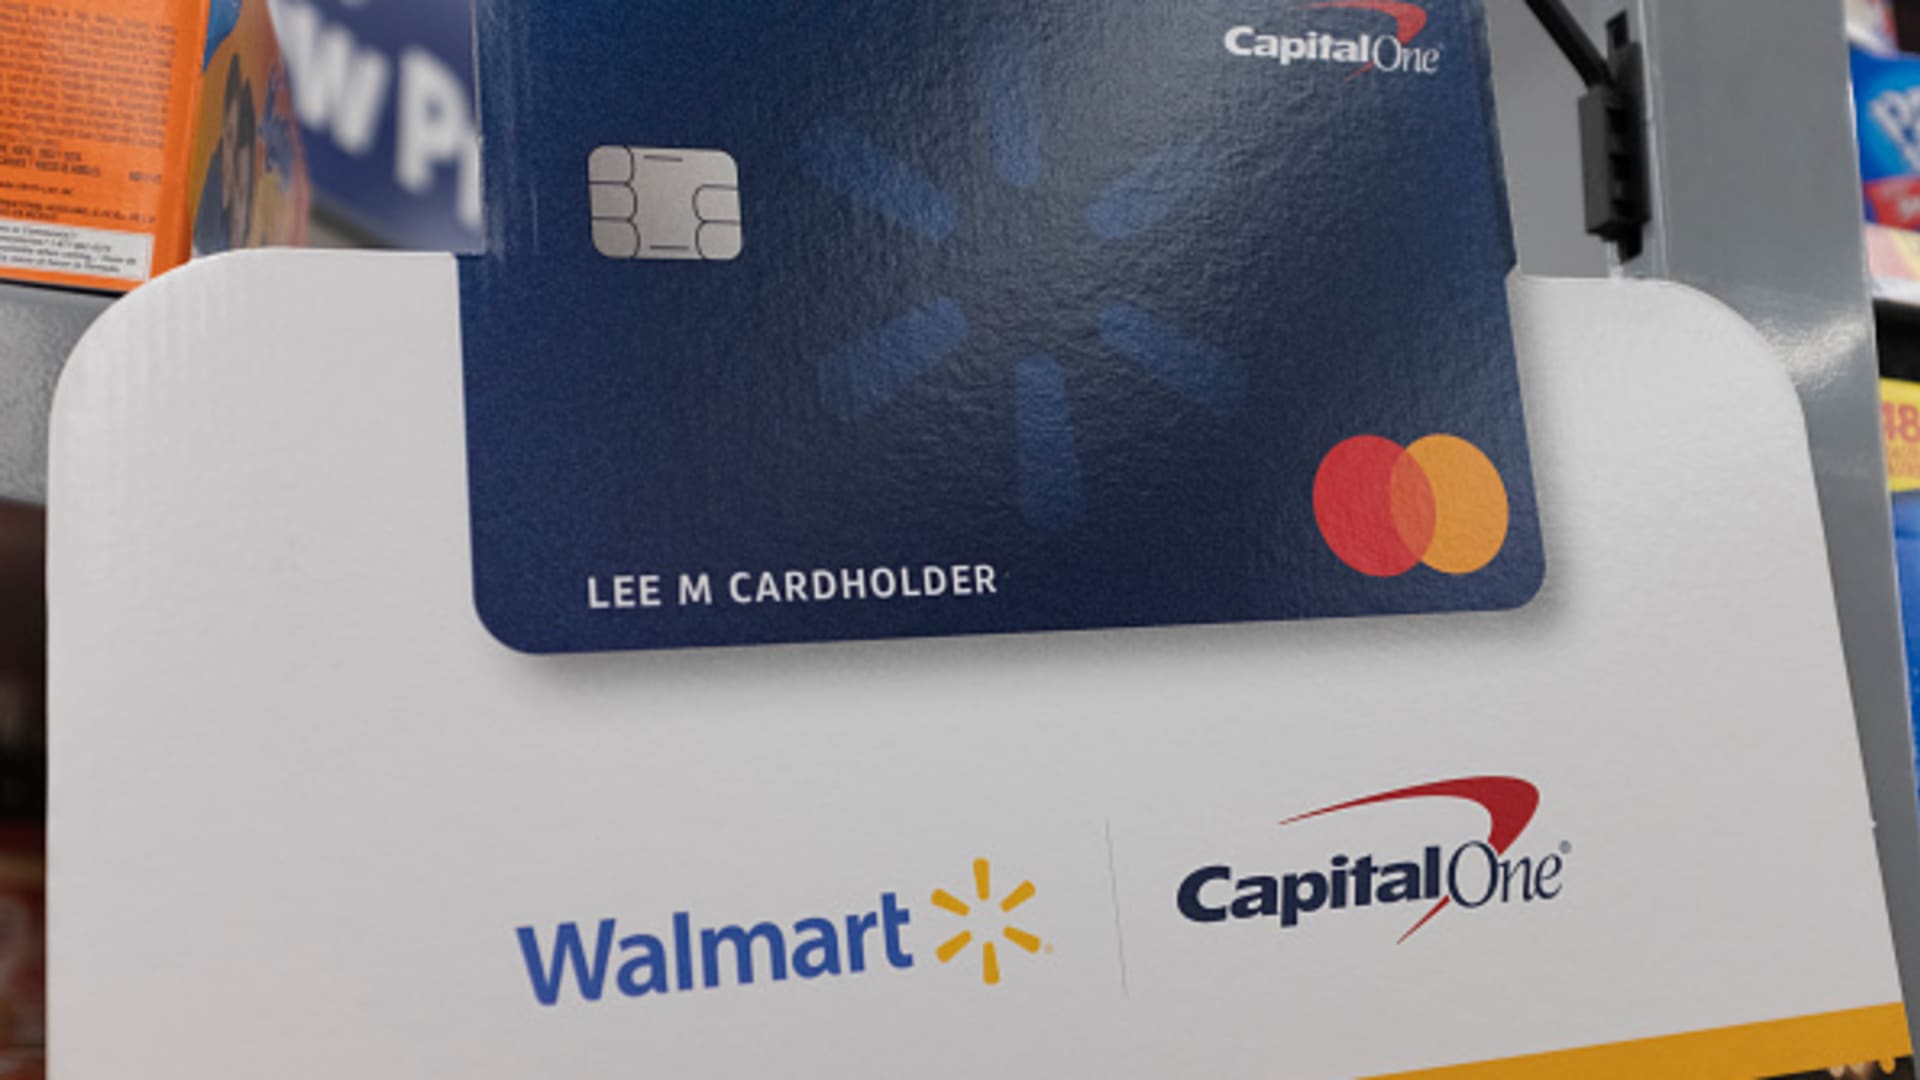 A Capital One Walmart credit card sign is seen at a store in Mountain View, California, United States on Tuesday, November 19, 2019.